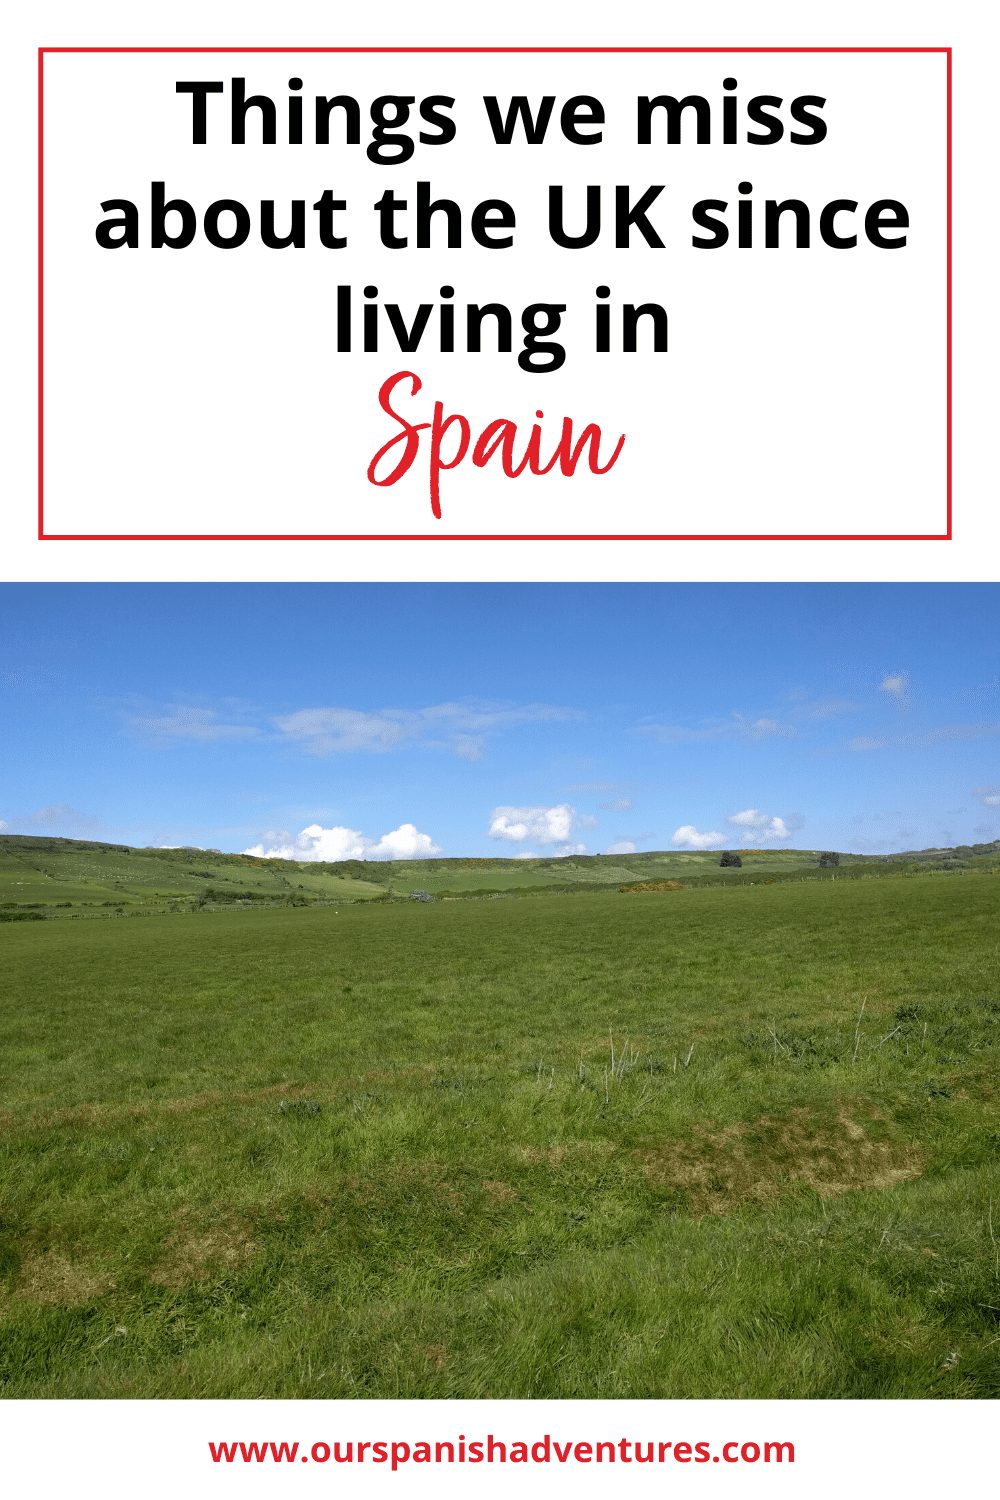 Things we miss about the UK | Our Spanish Adventures